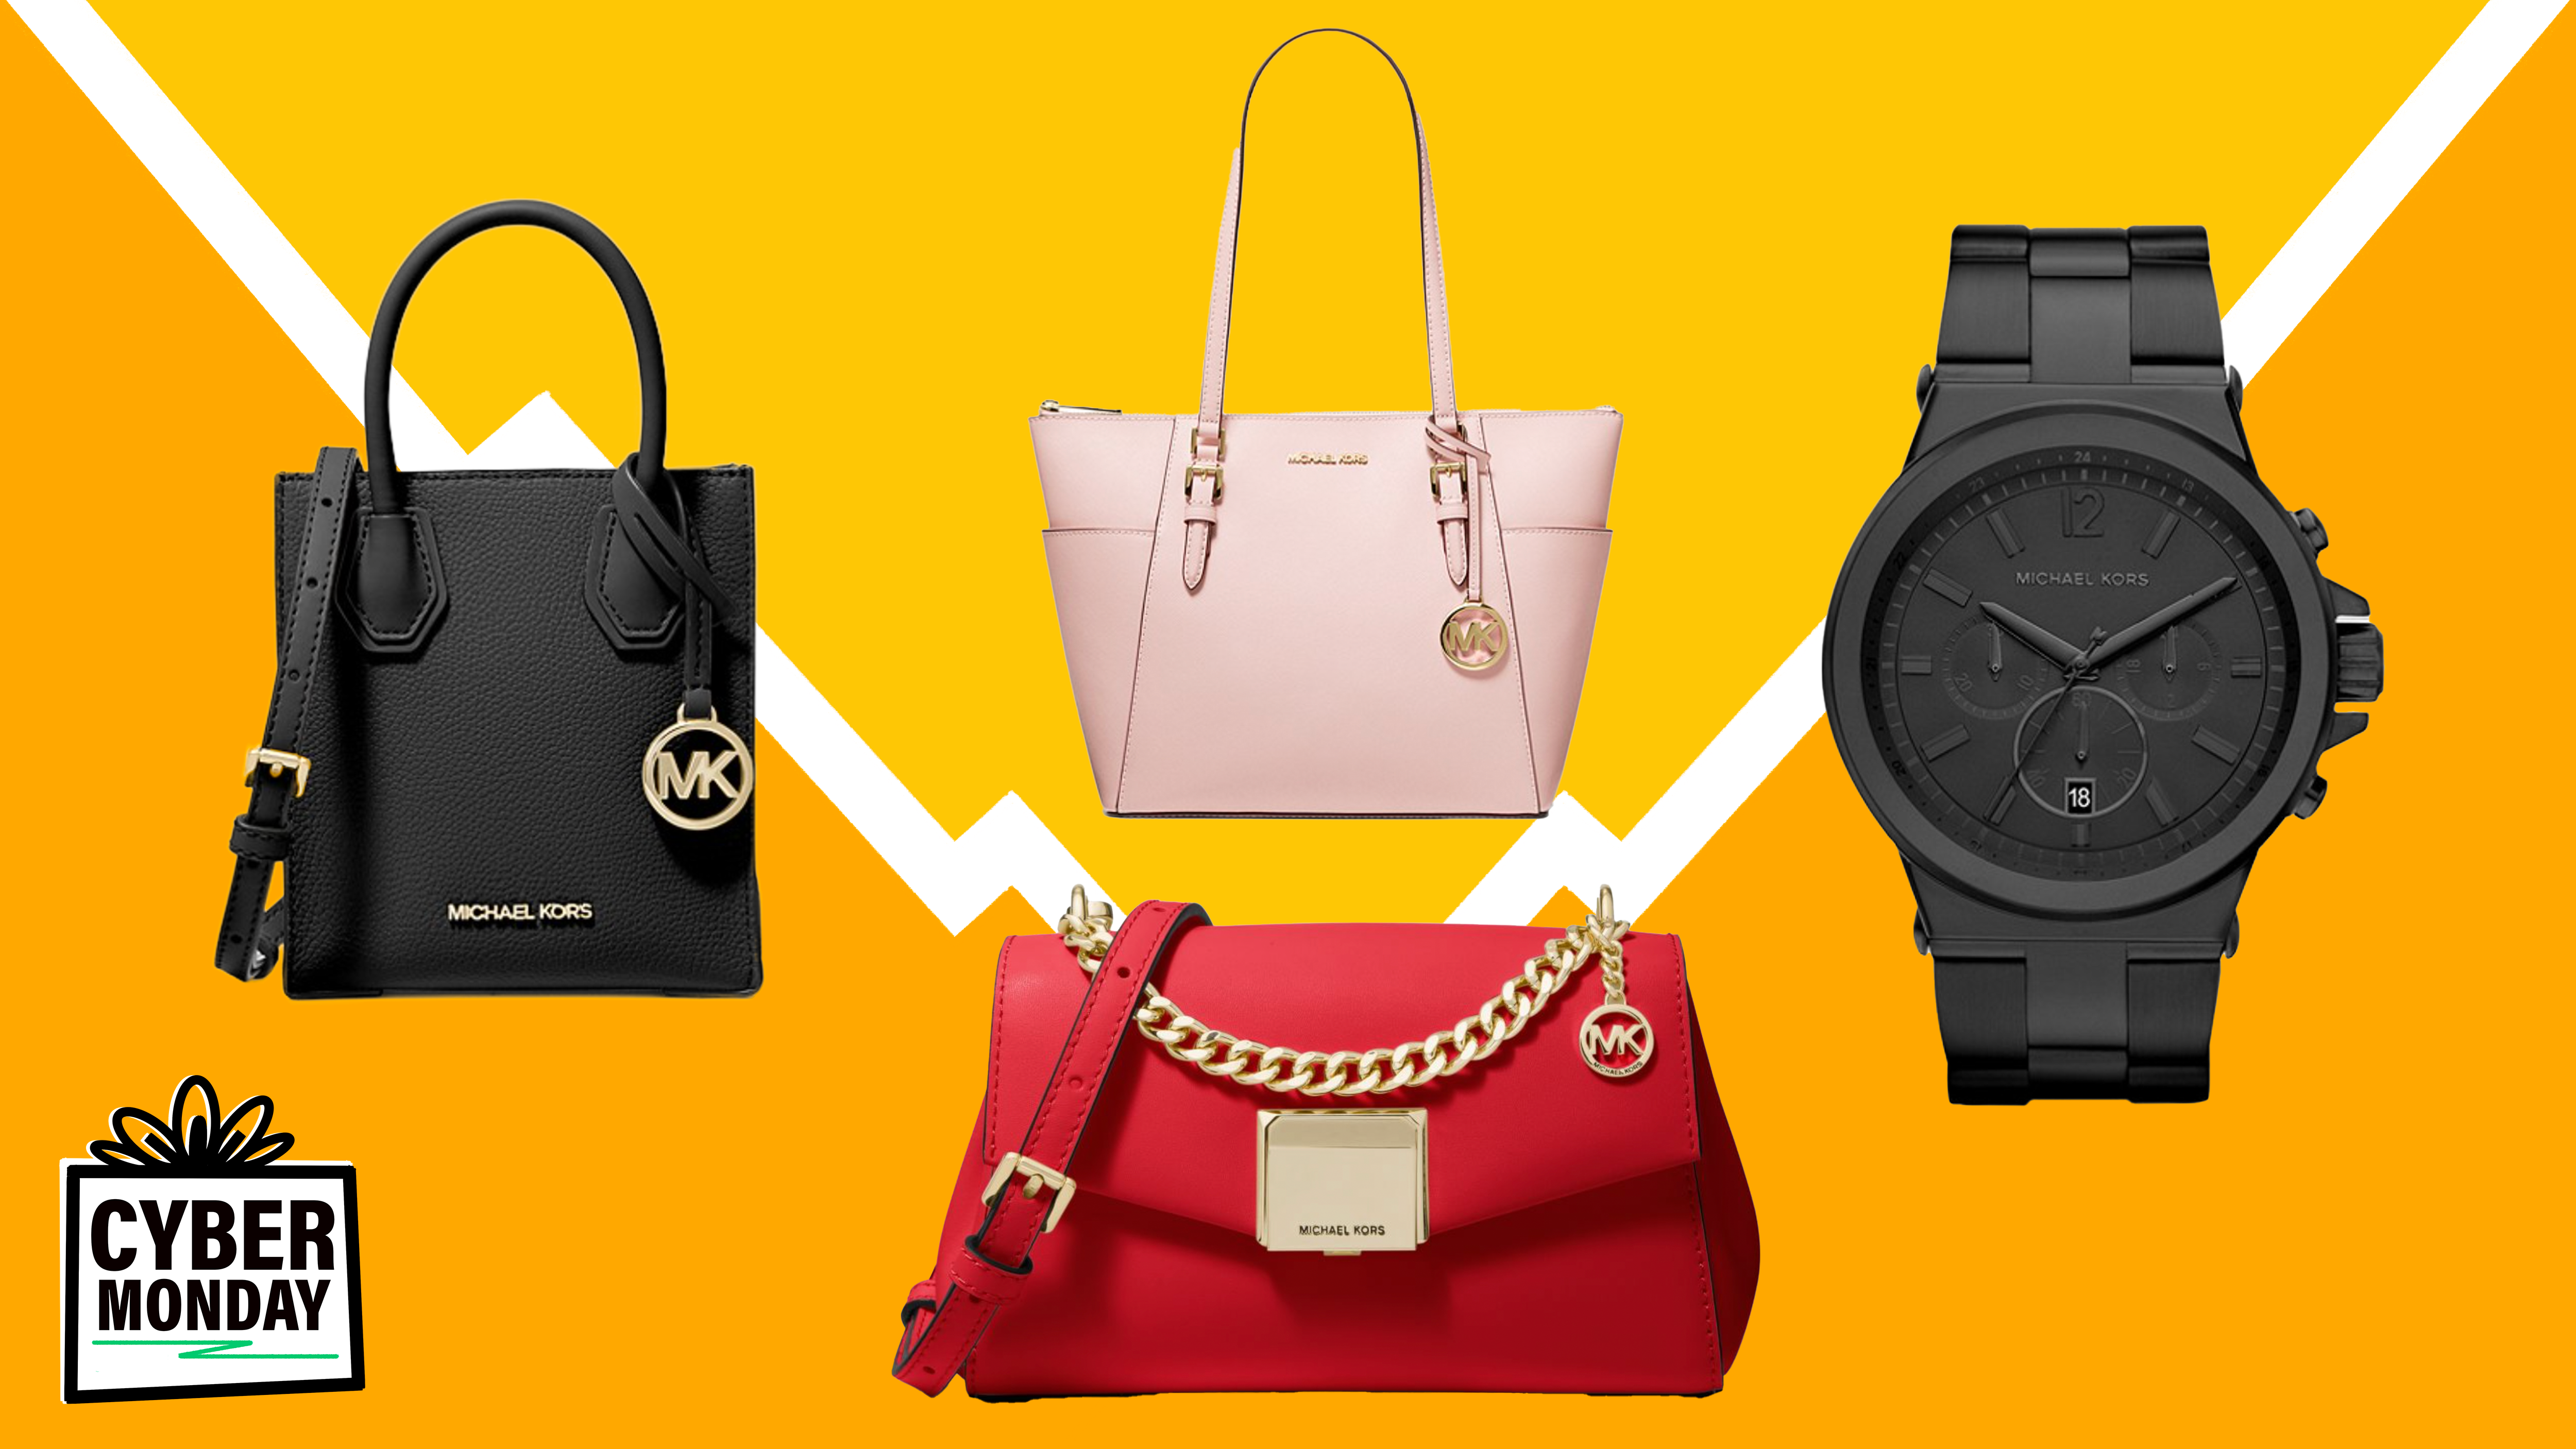 Cyber Monday 2021: Save hundreds on Michael Kors purses and watches